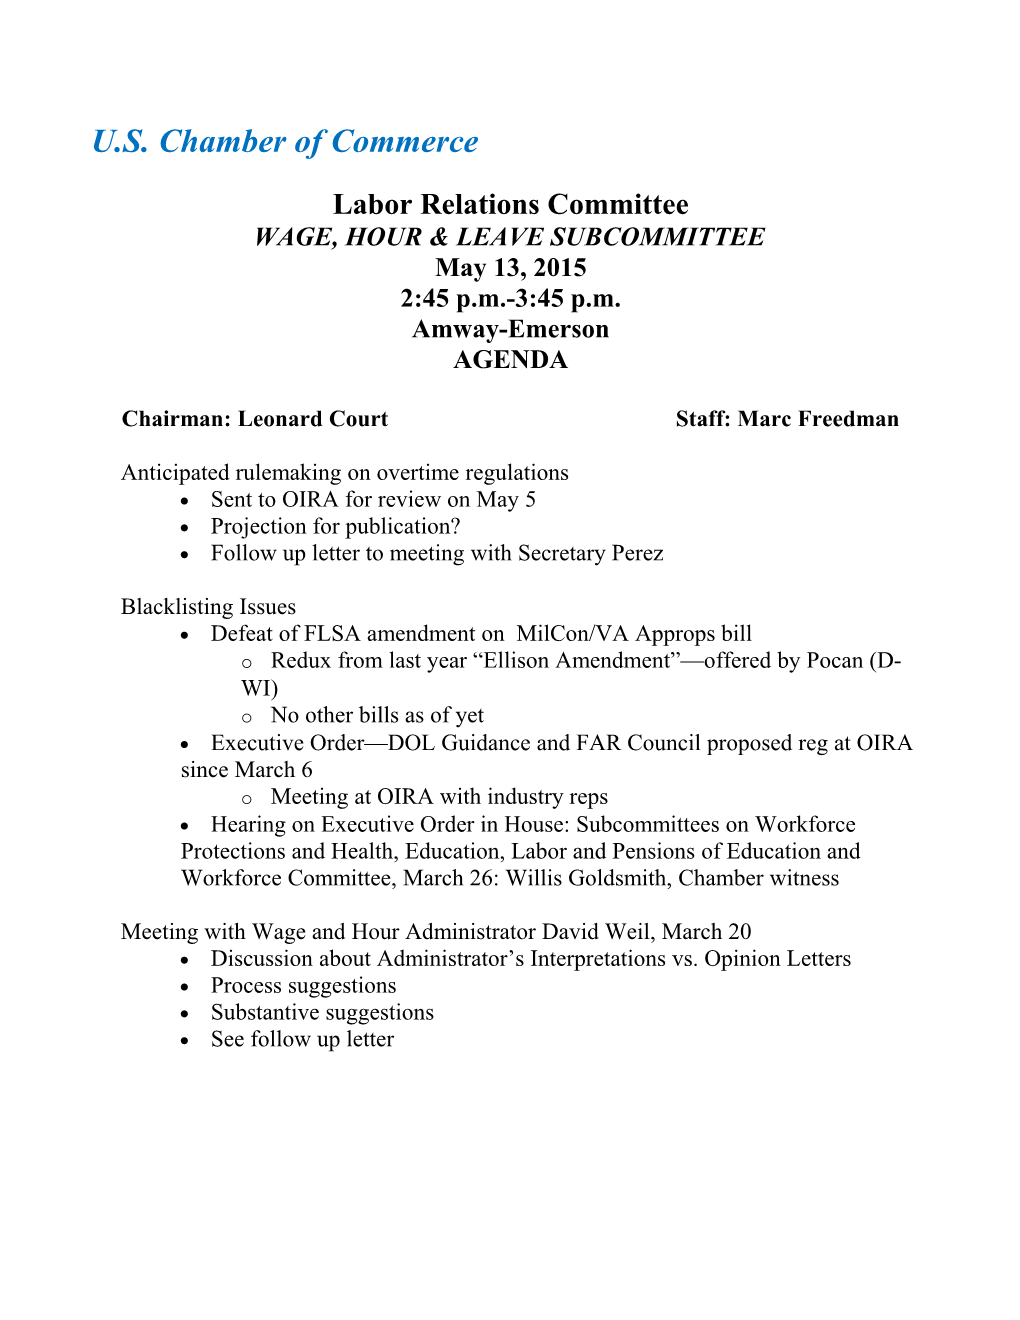 Wage, Hour & Leave Subcommittee